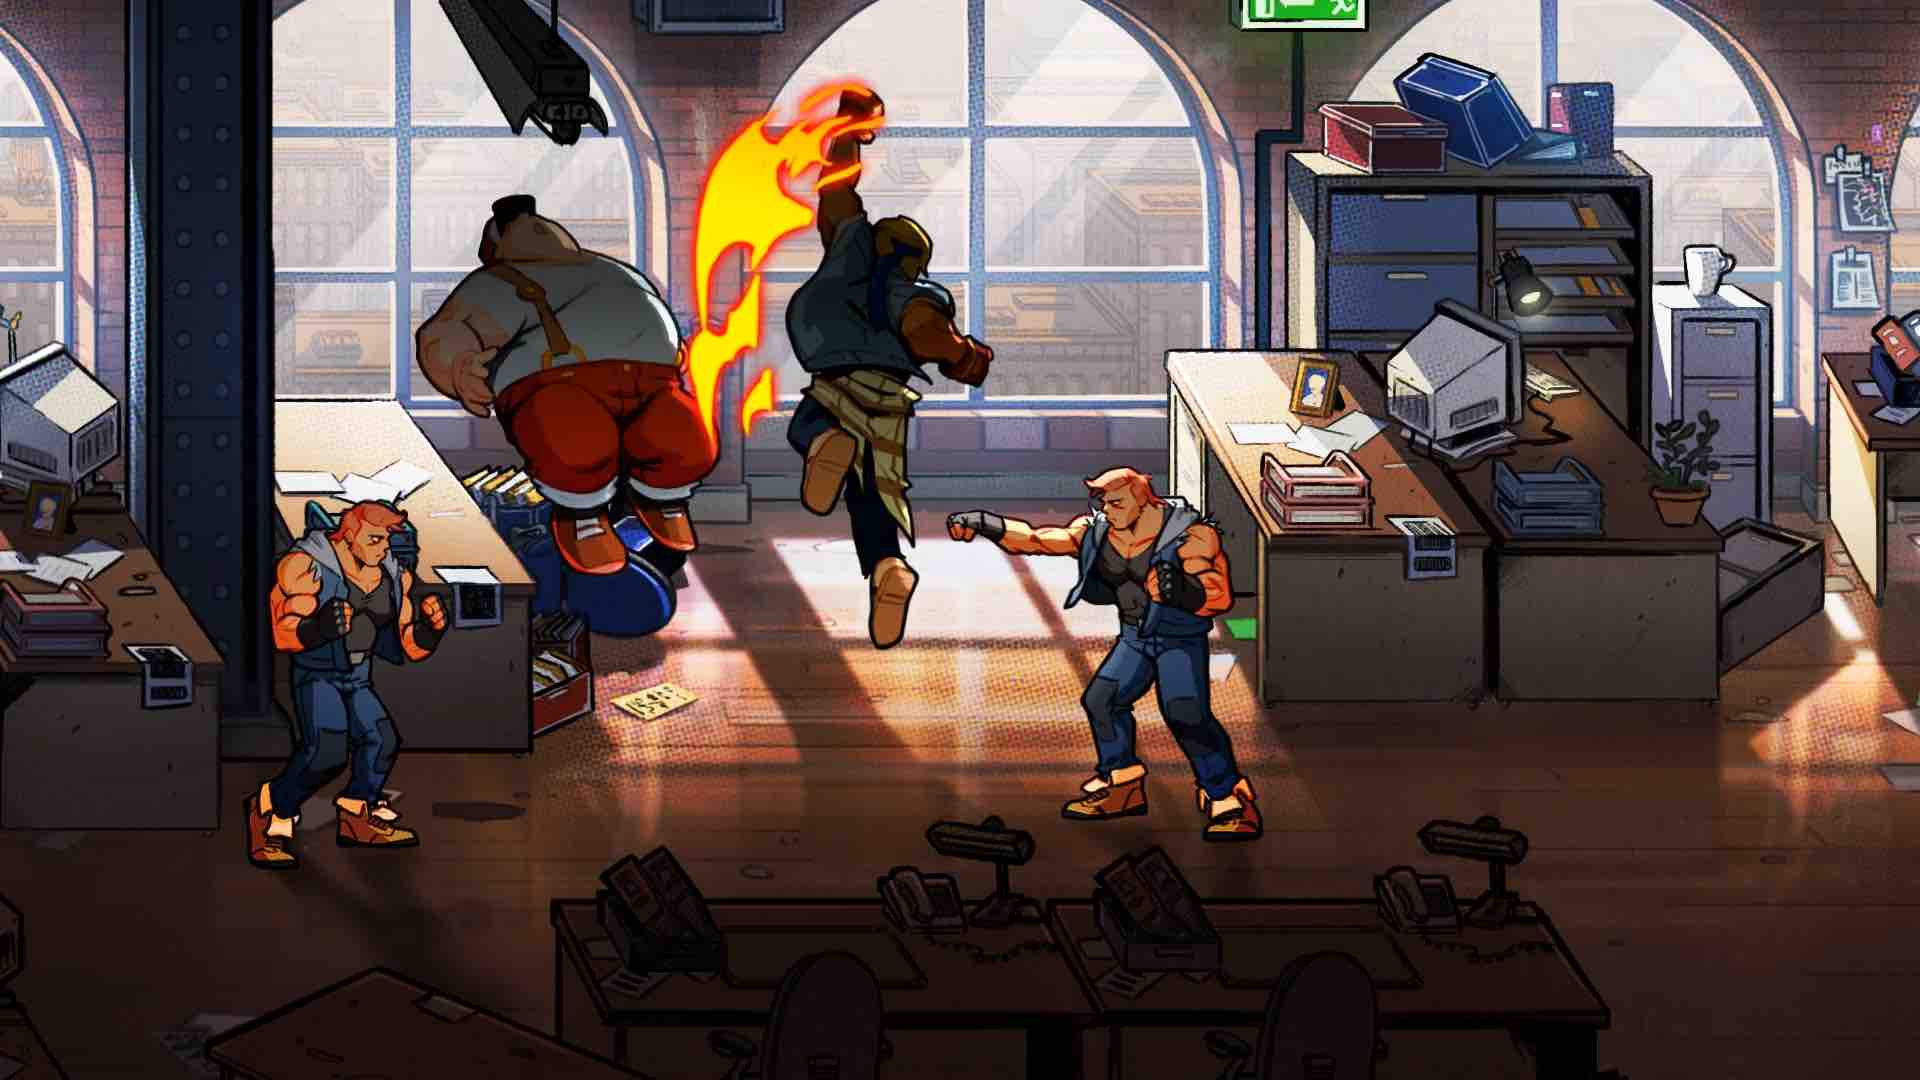 Hands On: Streets Of Rage 4 Lives Up To Its Legendary Heritage